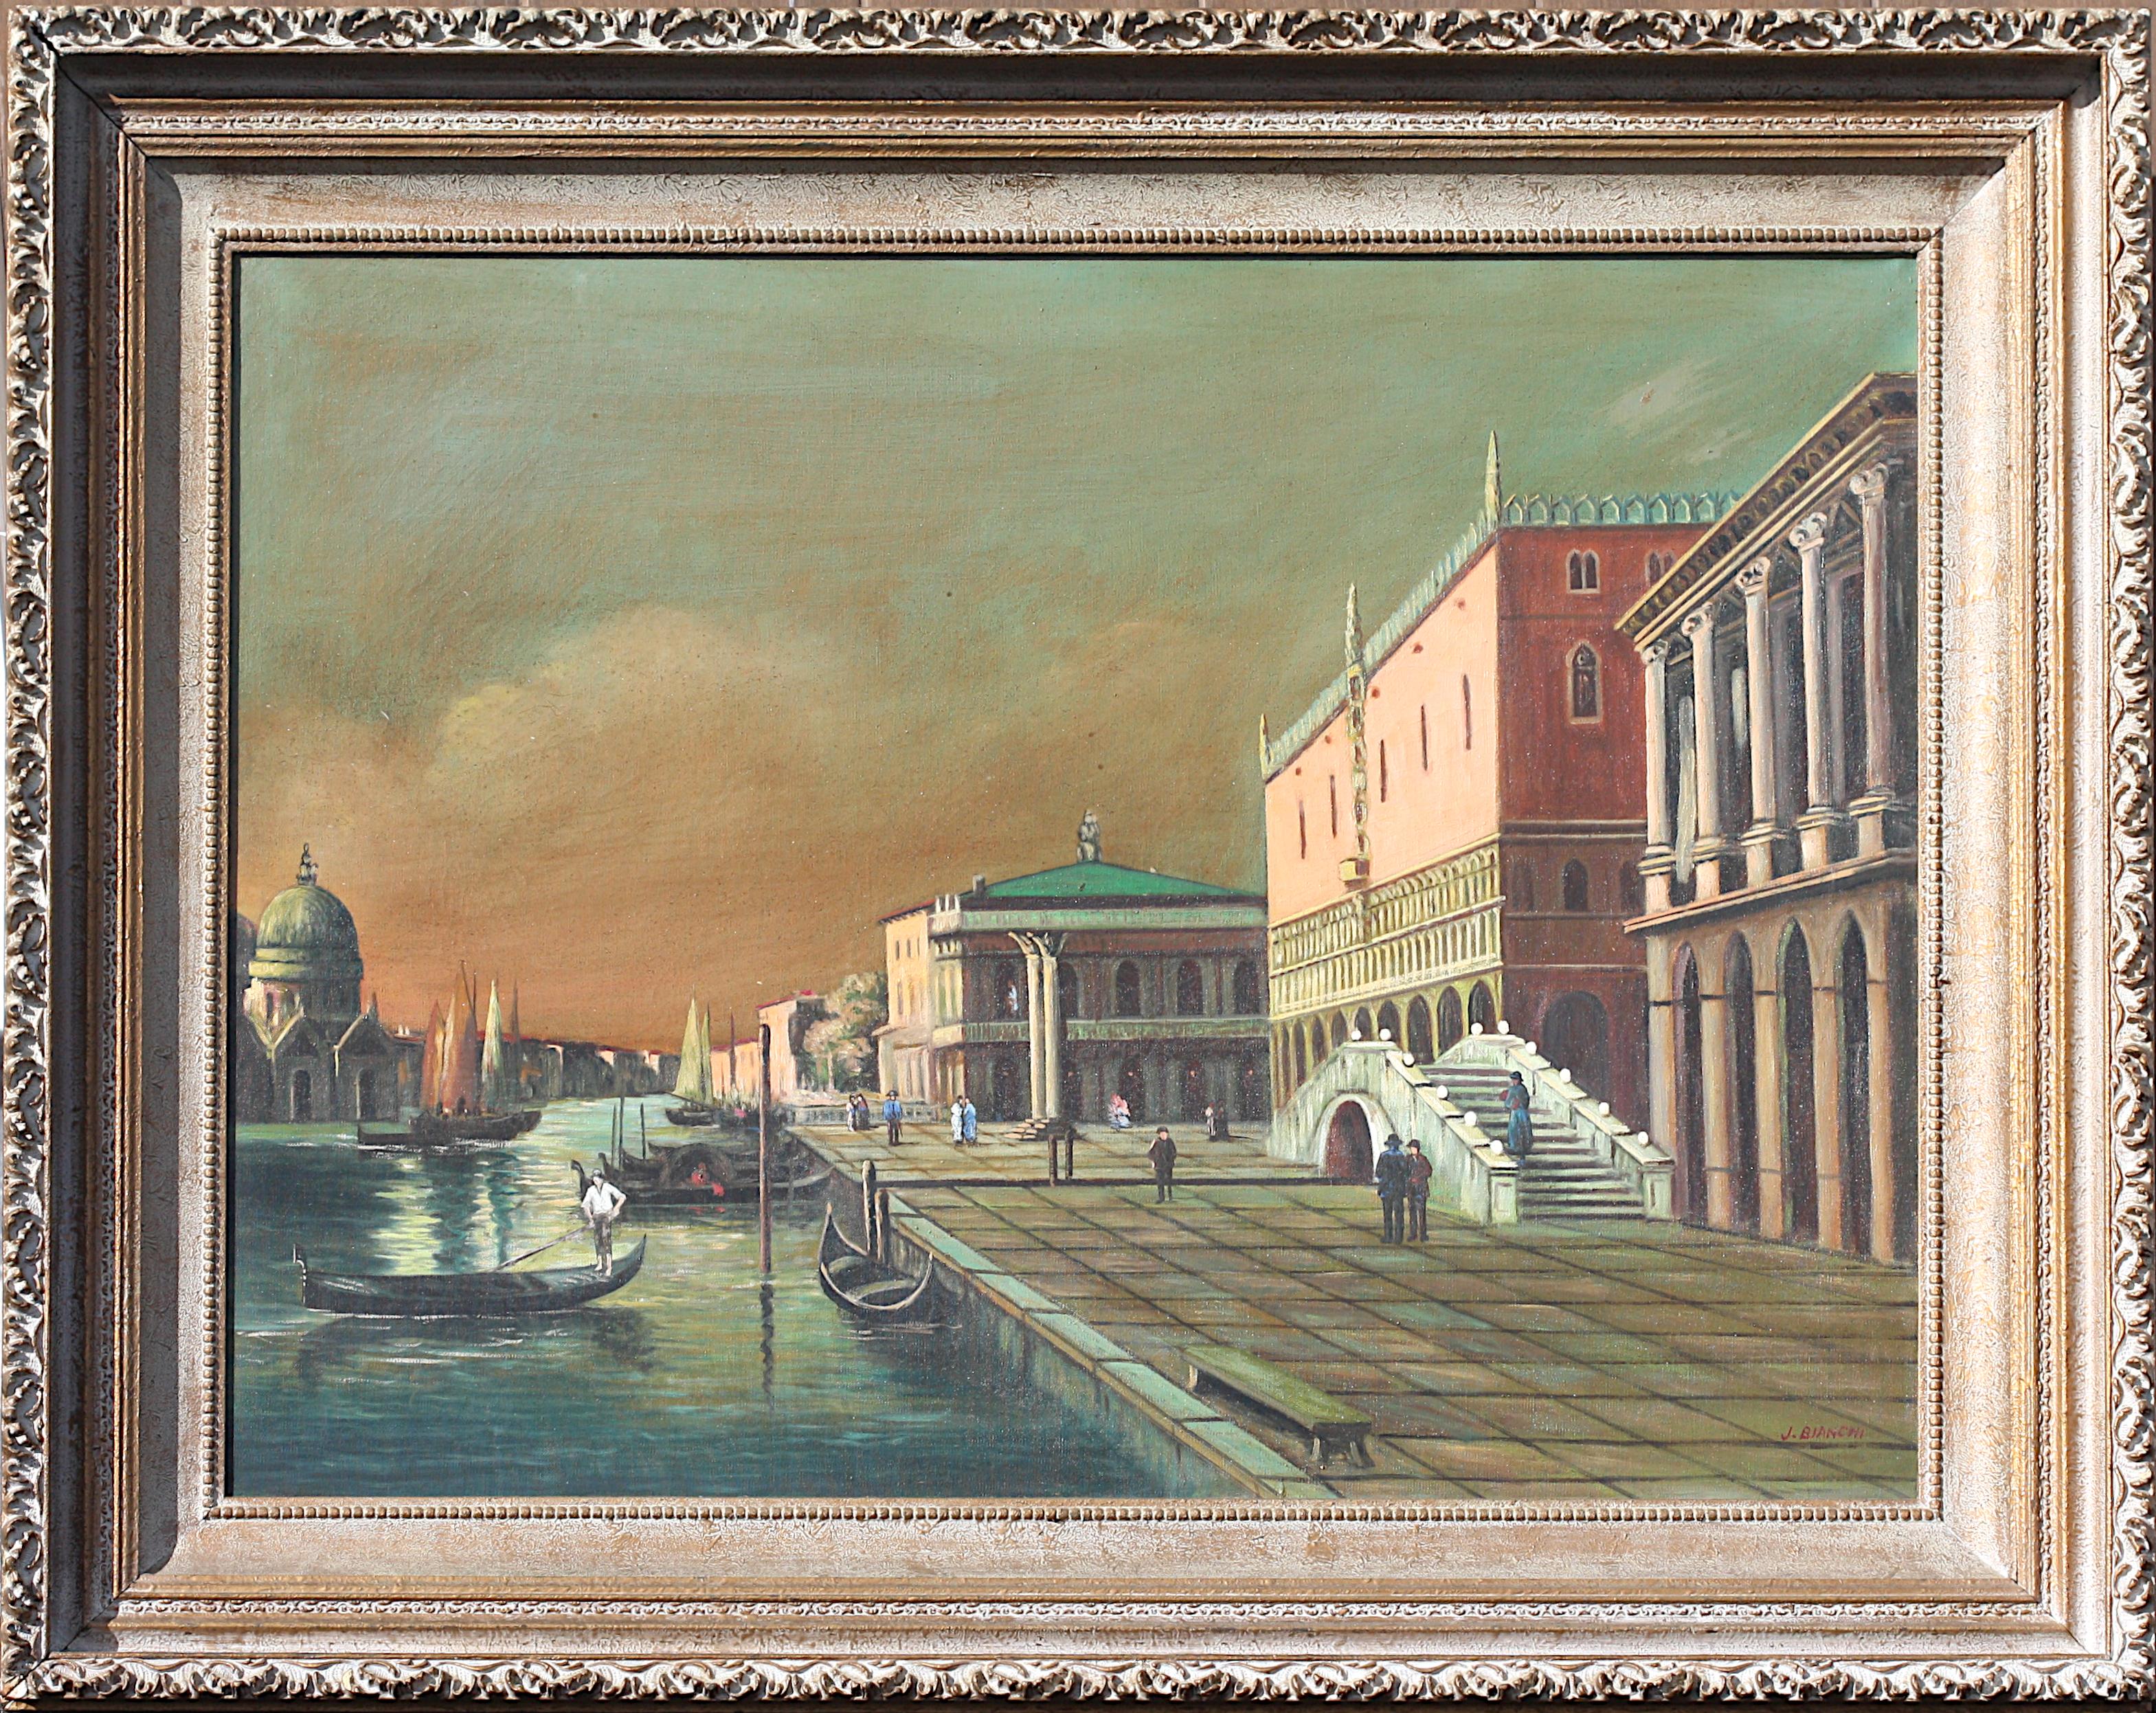 
John Bianchi, (American, 20th Century) Painting
The Grand Canal and The Palazzo Ducale, oil on canvas, signed J. Bianchi, lower right
30 by 40 in., overall, farmed 40 by 50 in.